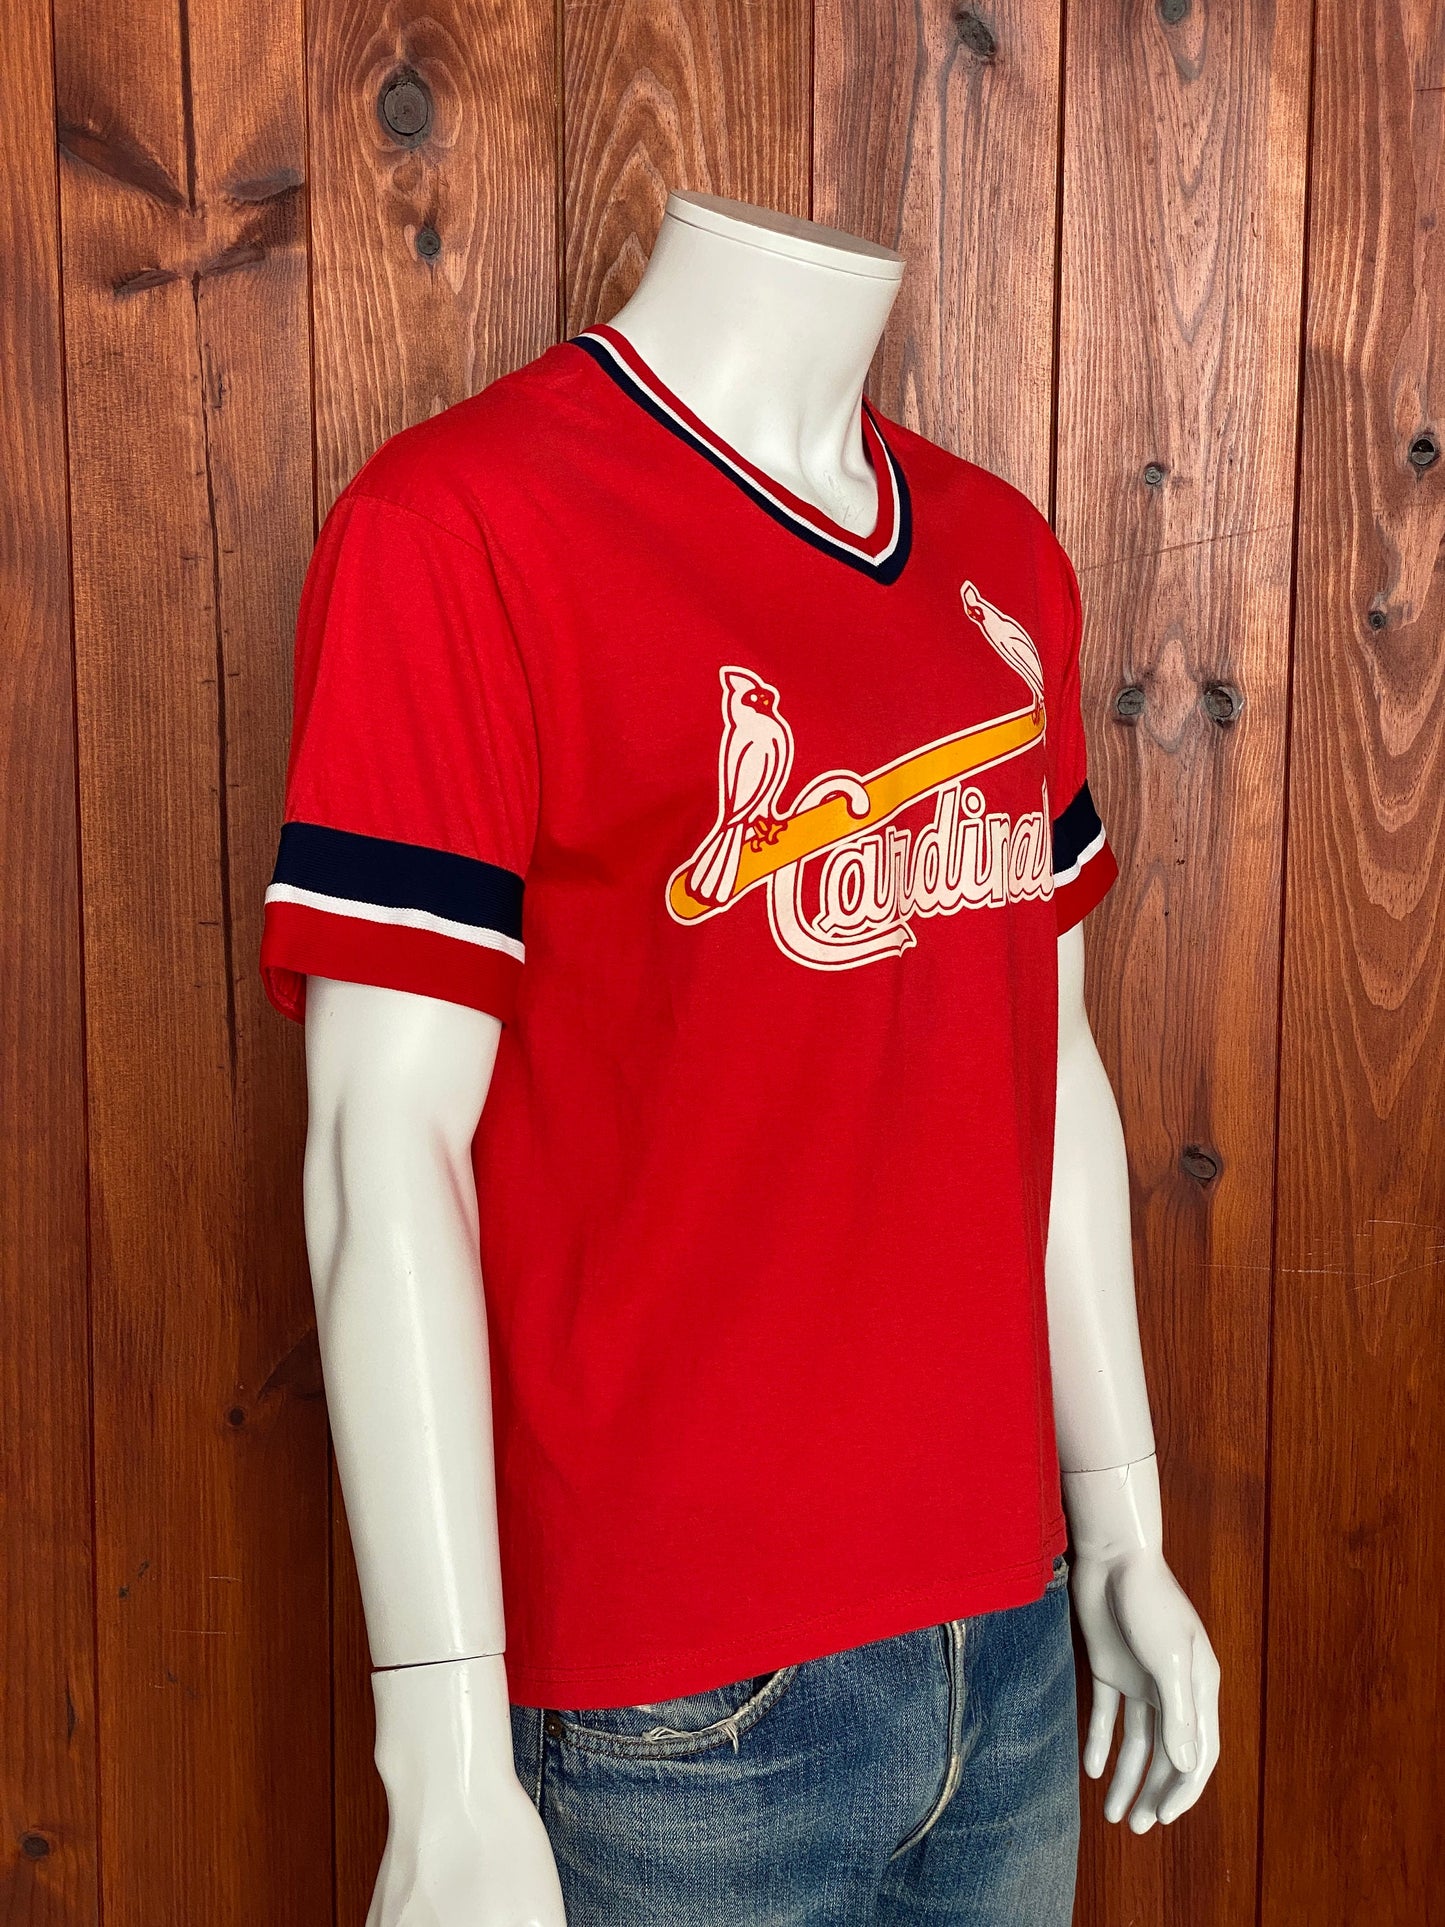 Cardinals Baseball 80s Vintage Poly-cotton T-shirt Size M Made in USA by Russell Athletic